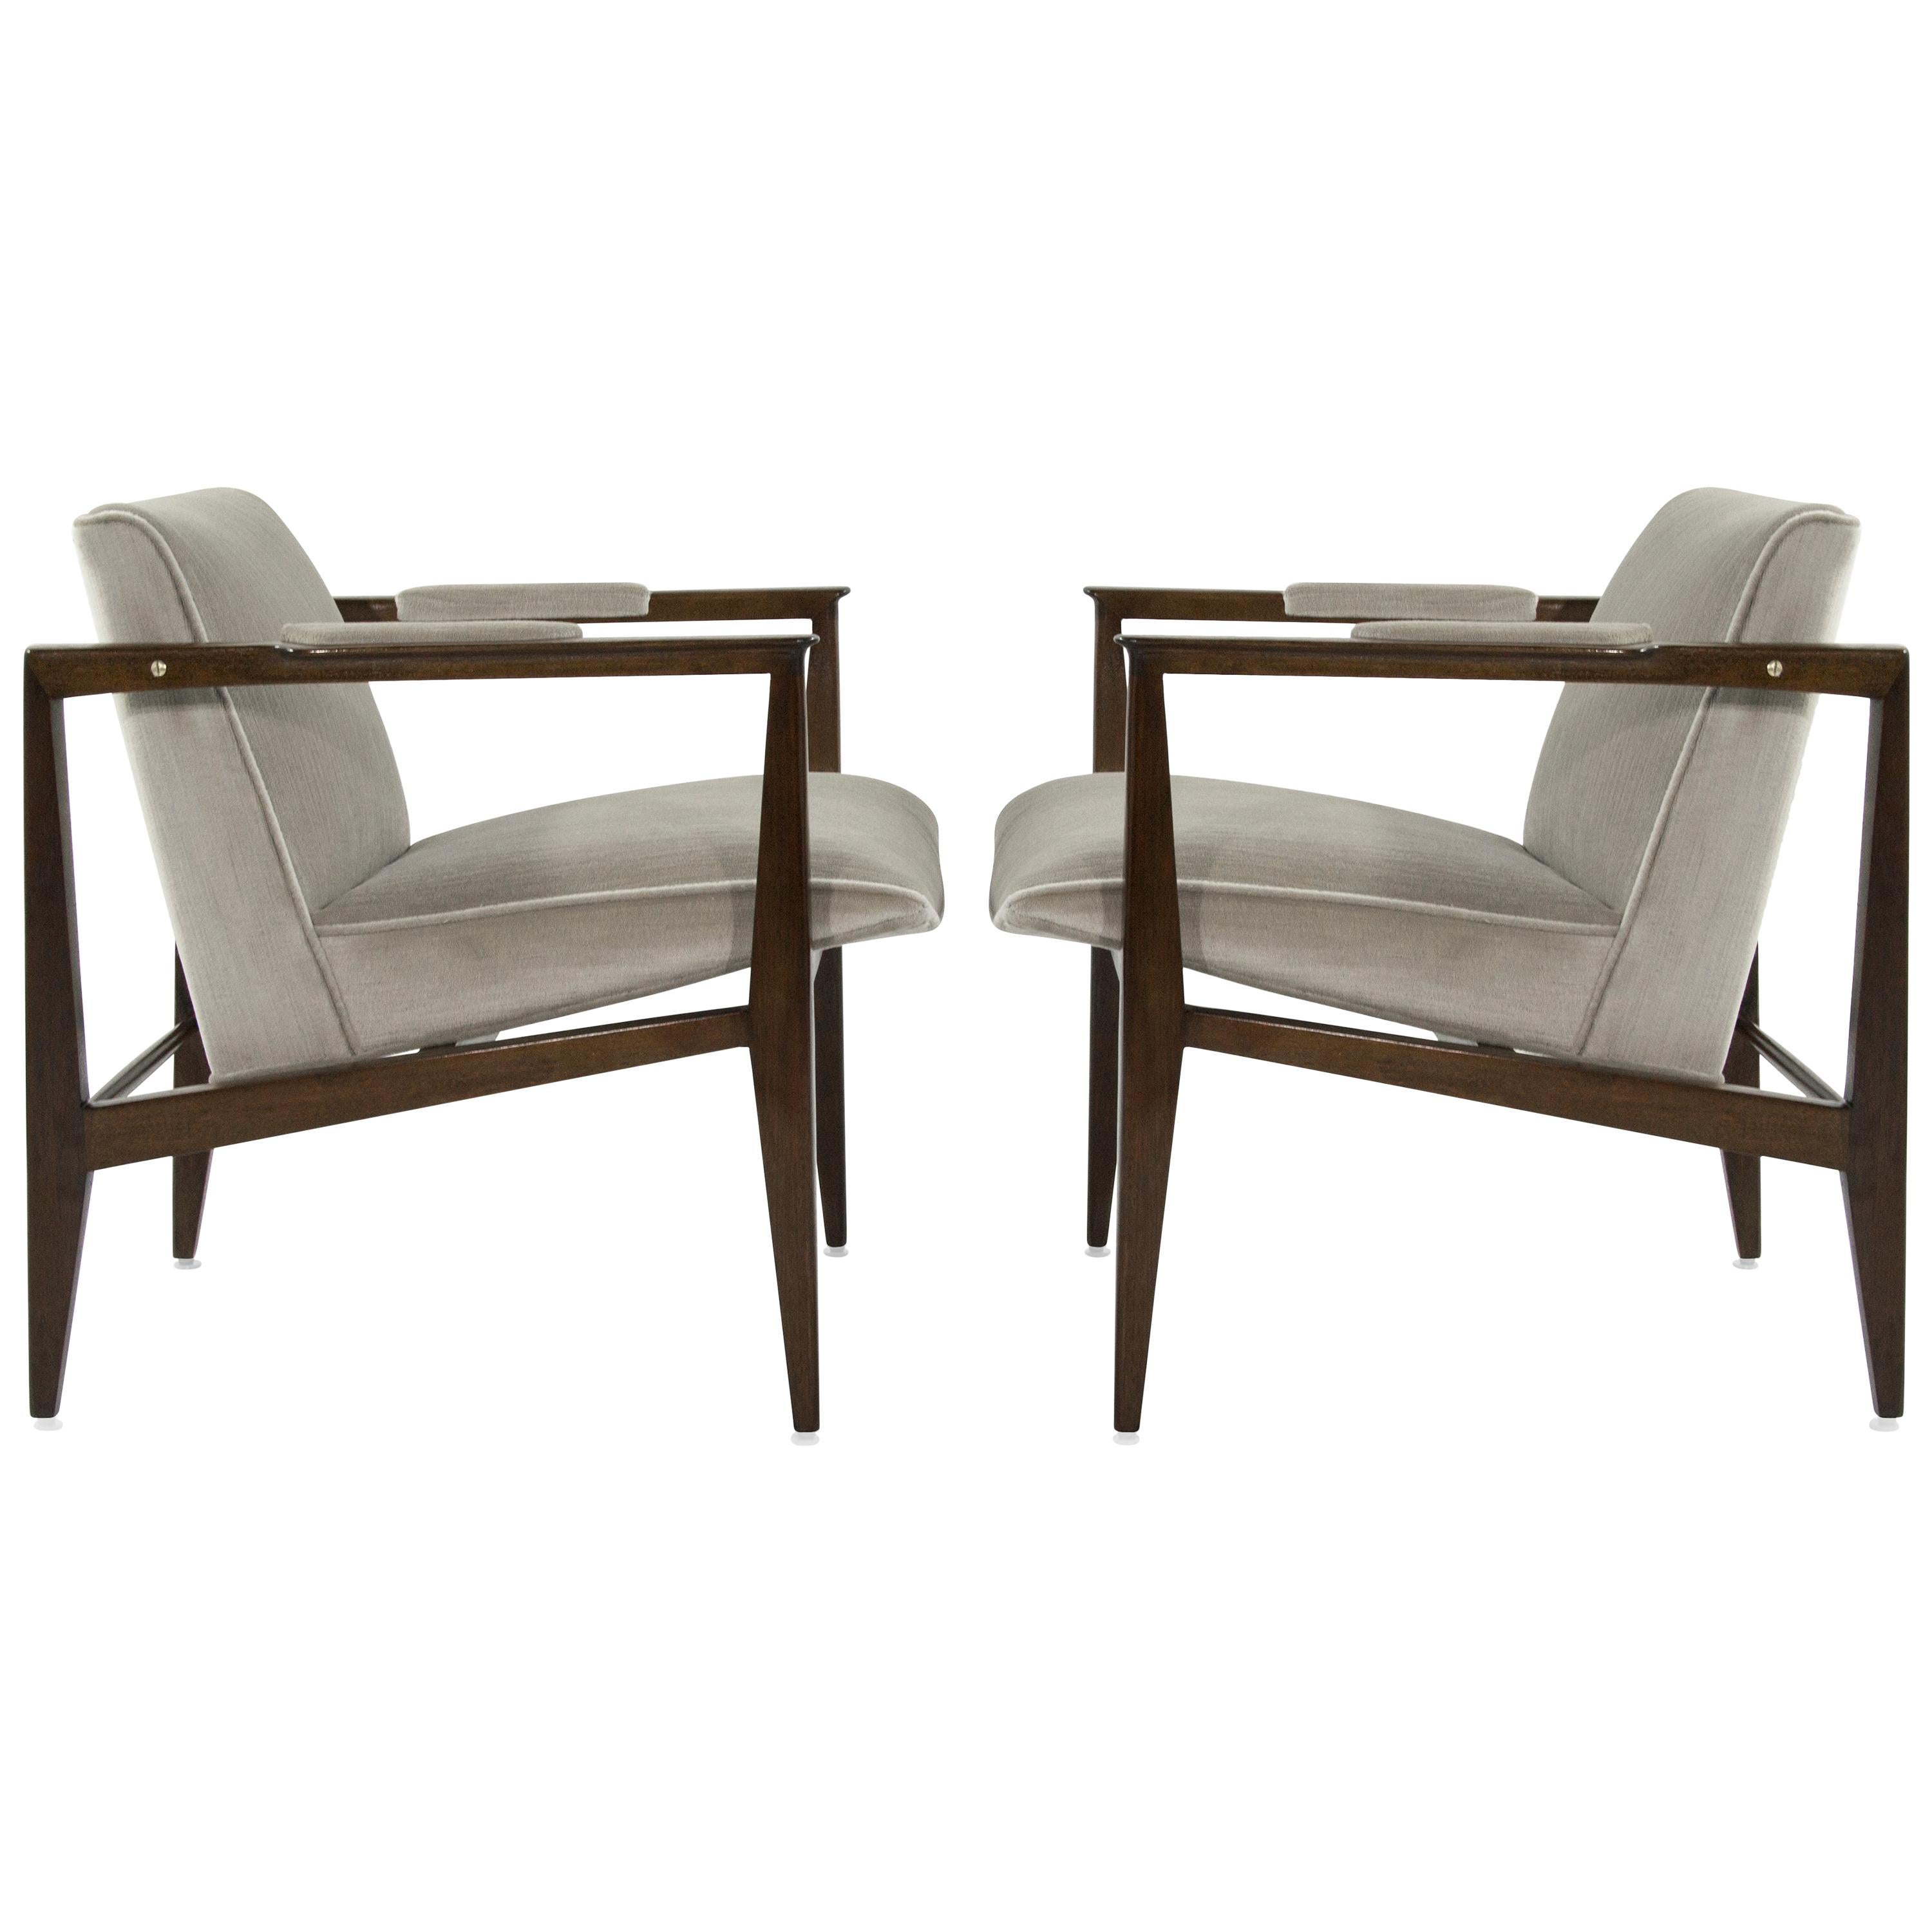 Brass Accented Edward Wormley for Dunbar Lounge Chairs